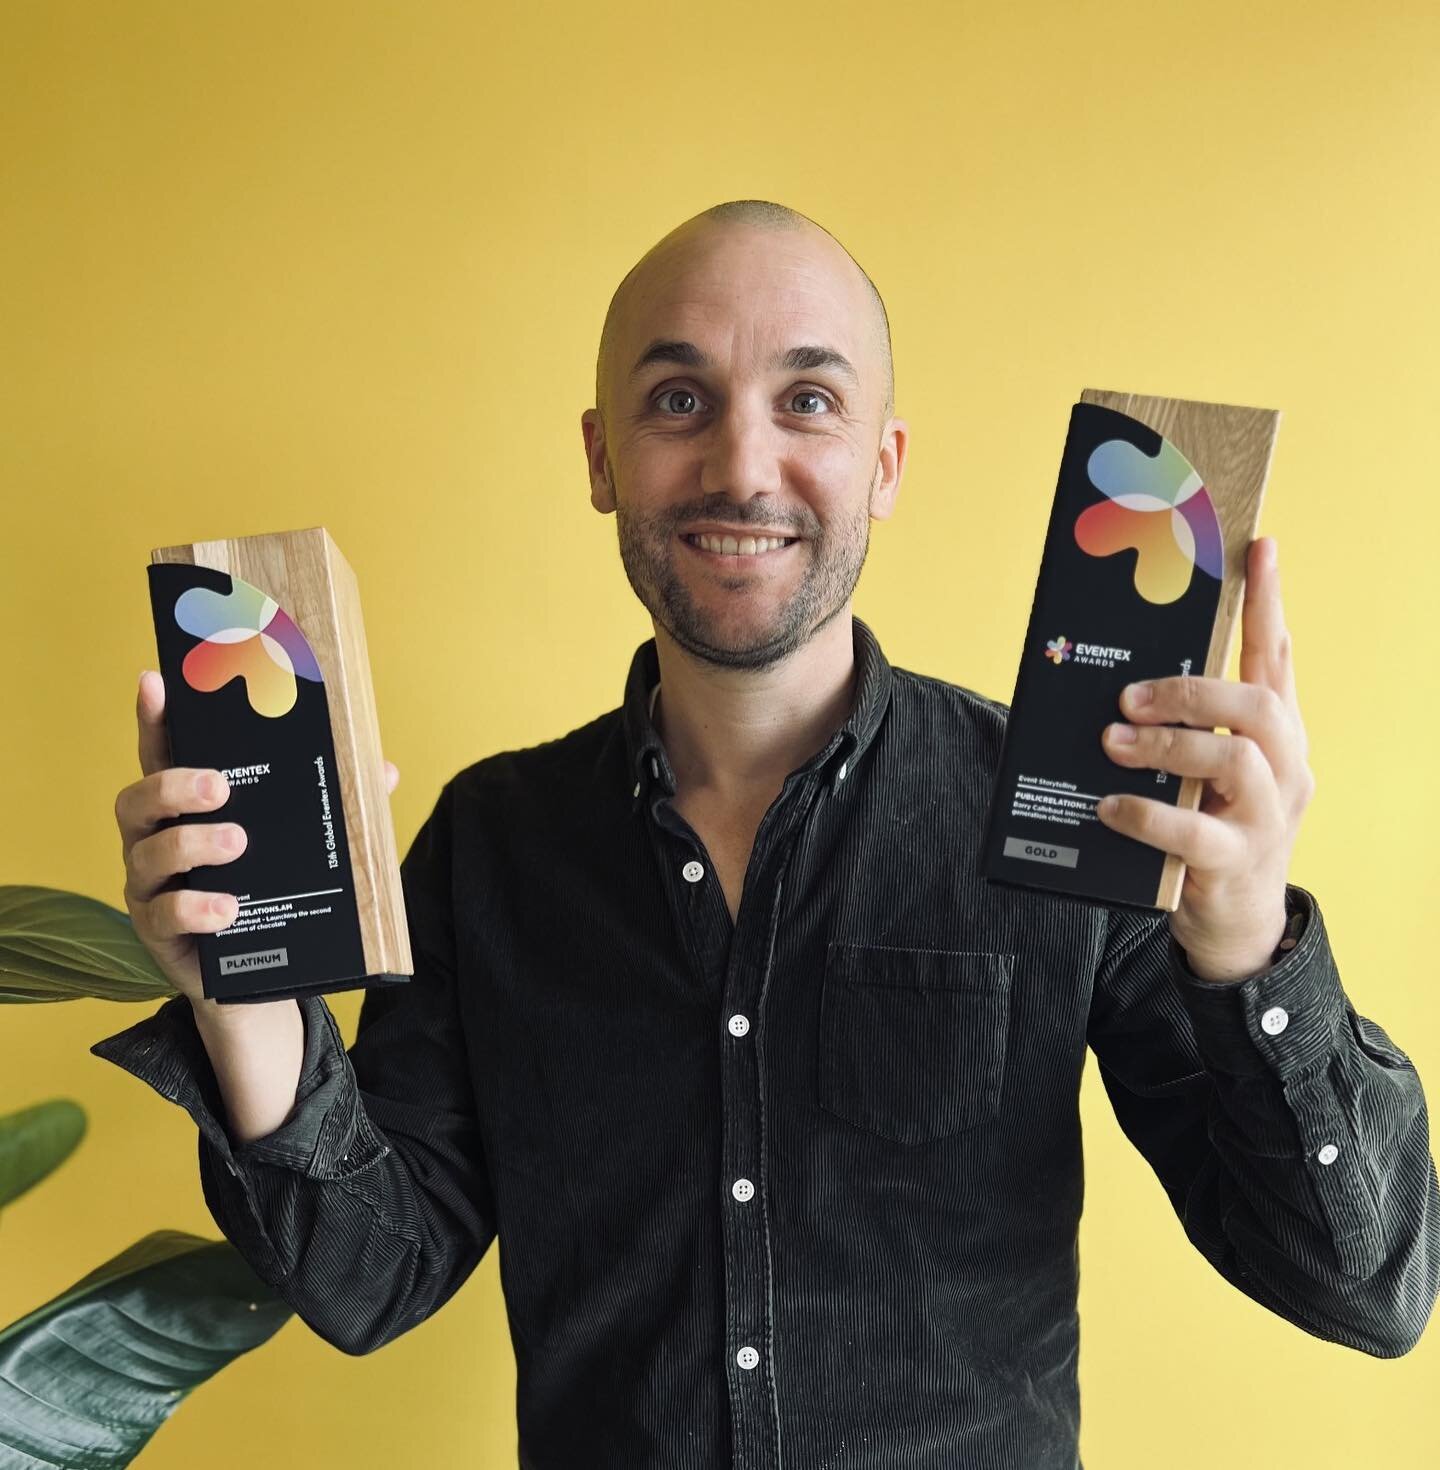 We are ecstatic to make it to the @eventex.co Awards top 100 event organizers and agencies! 🥳🏆

You can see a happy @geluct with the 2 out of 5 awards won this year: the Platinum &amp; Gold award for #EventStorytelling &amp; #HybridEvent, which led